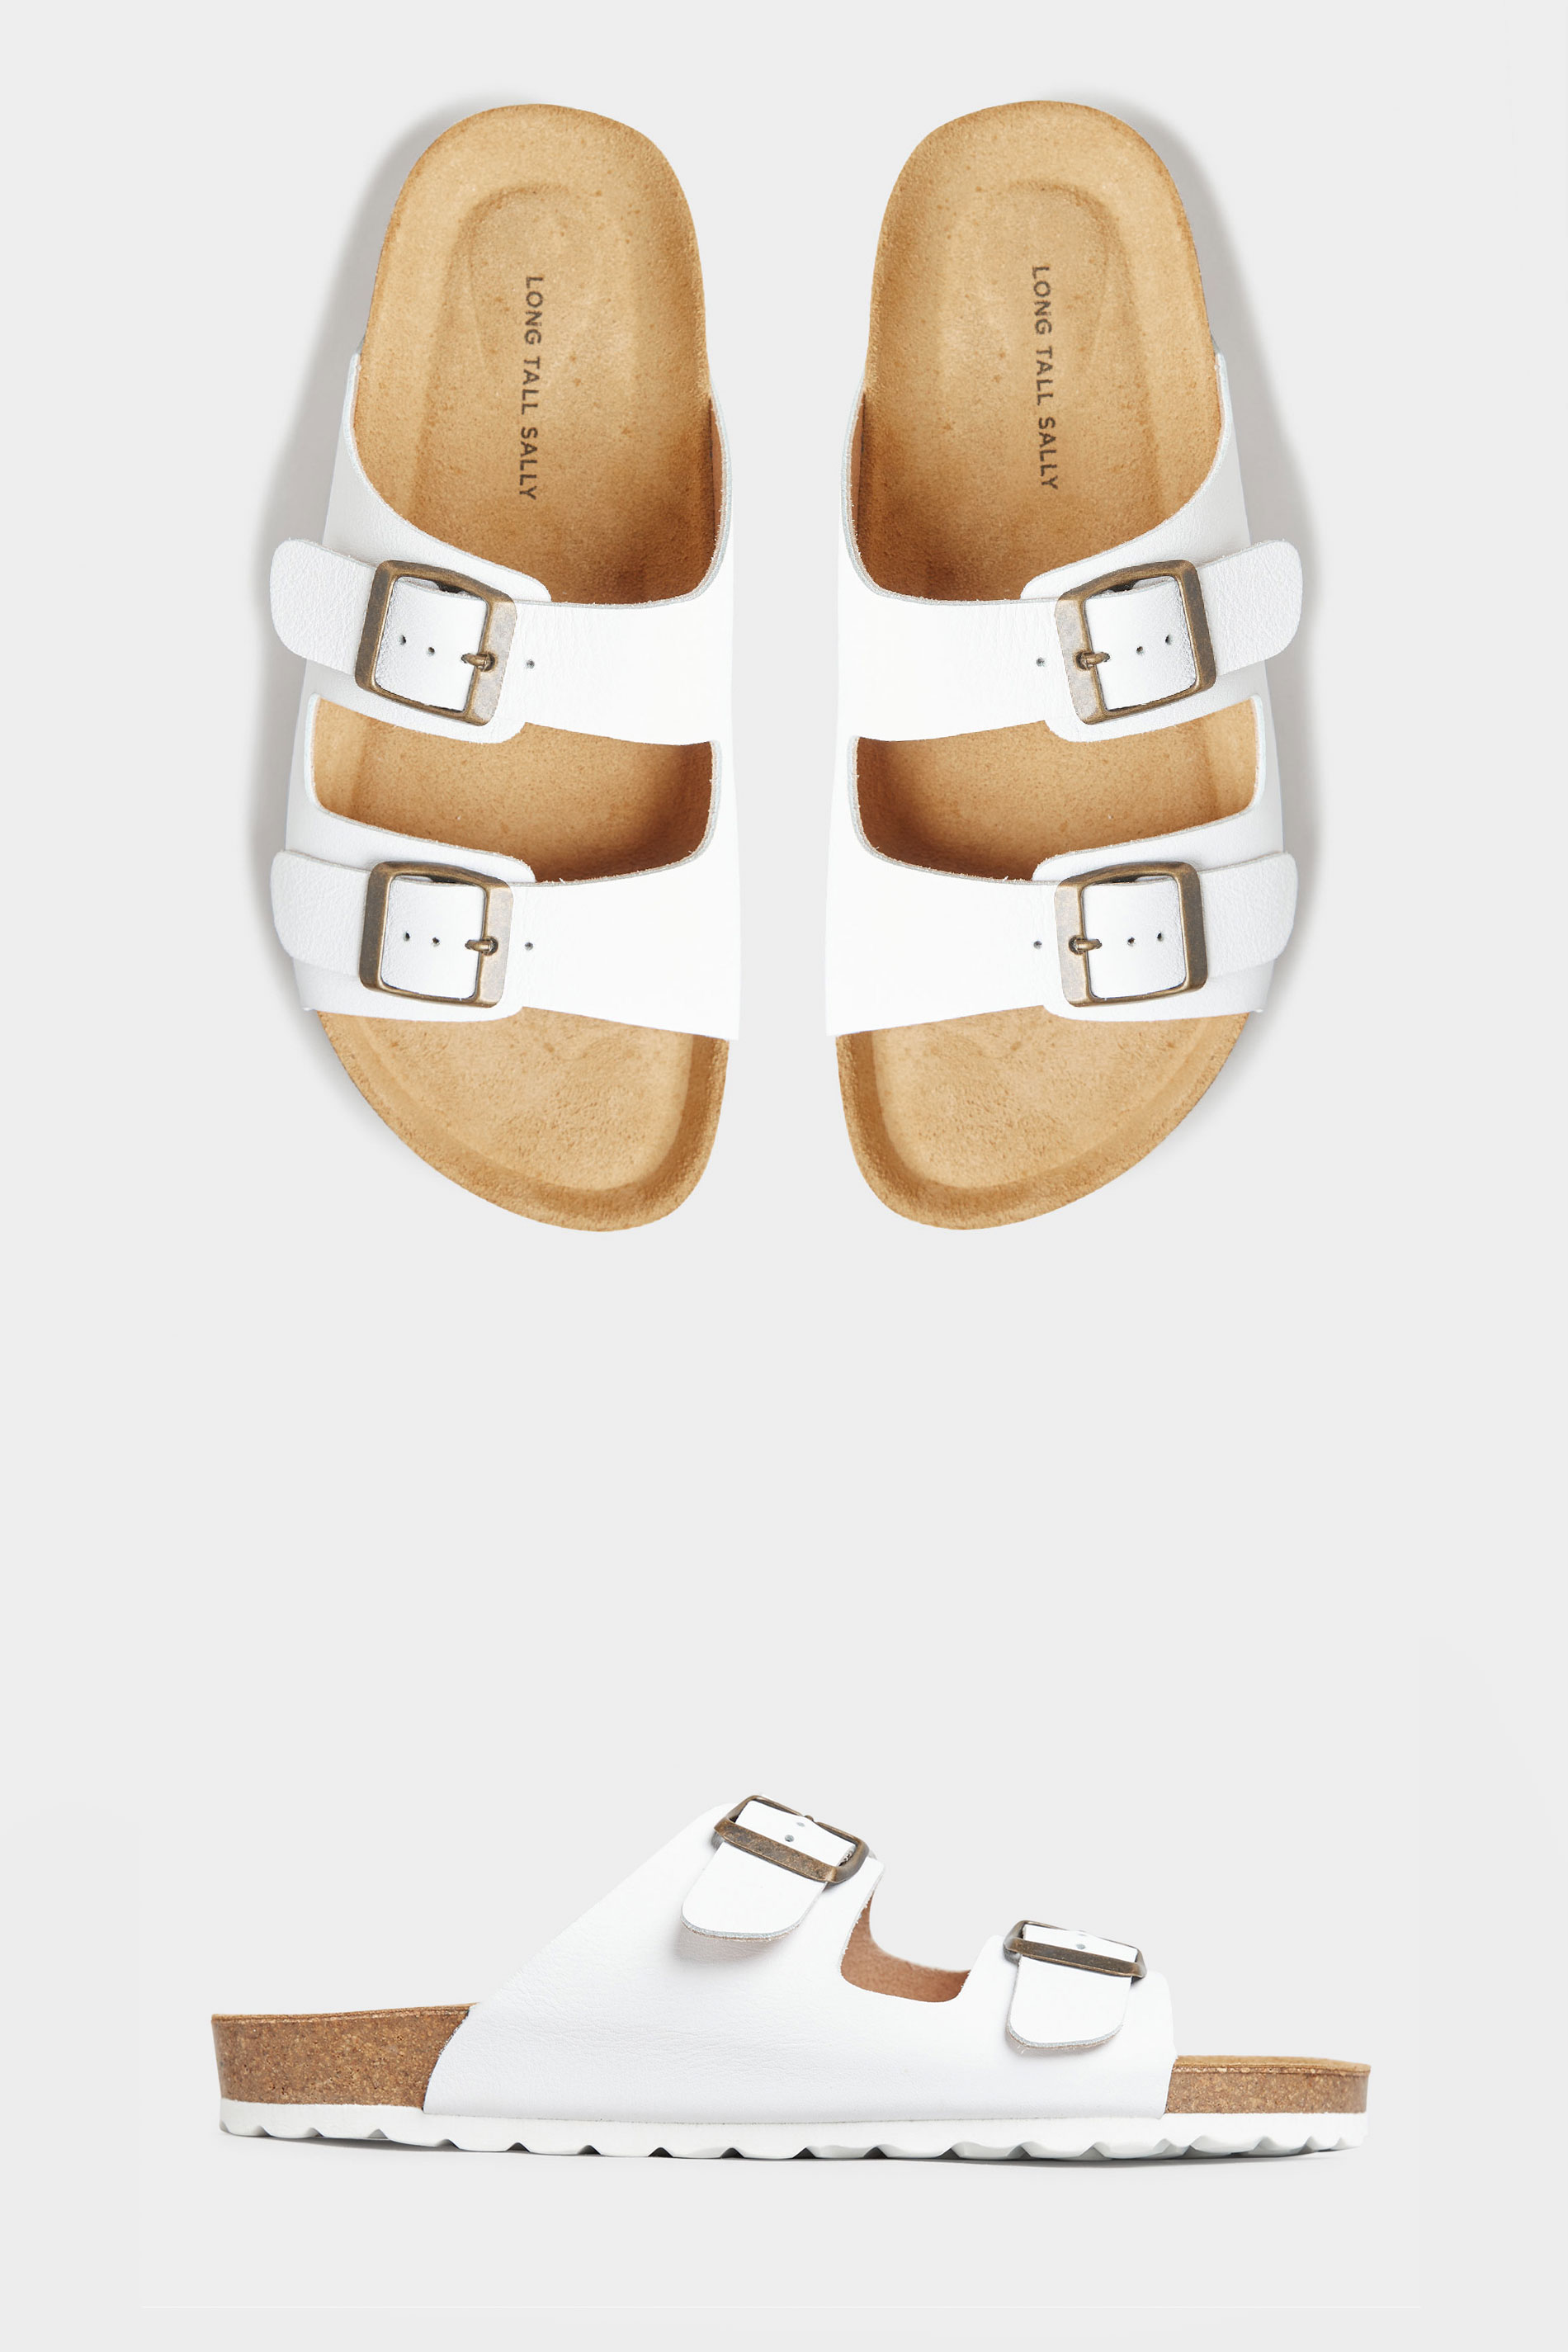 Grande taille  Sandals Grande taille  Flat Sandals | LTS White Leather Two Buckle Footbed Sandals In Standard D Fit - OG67275